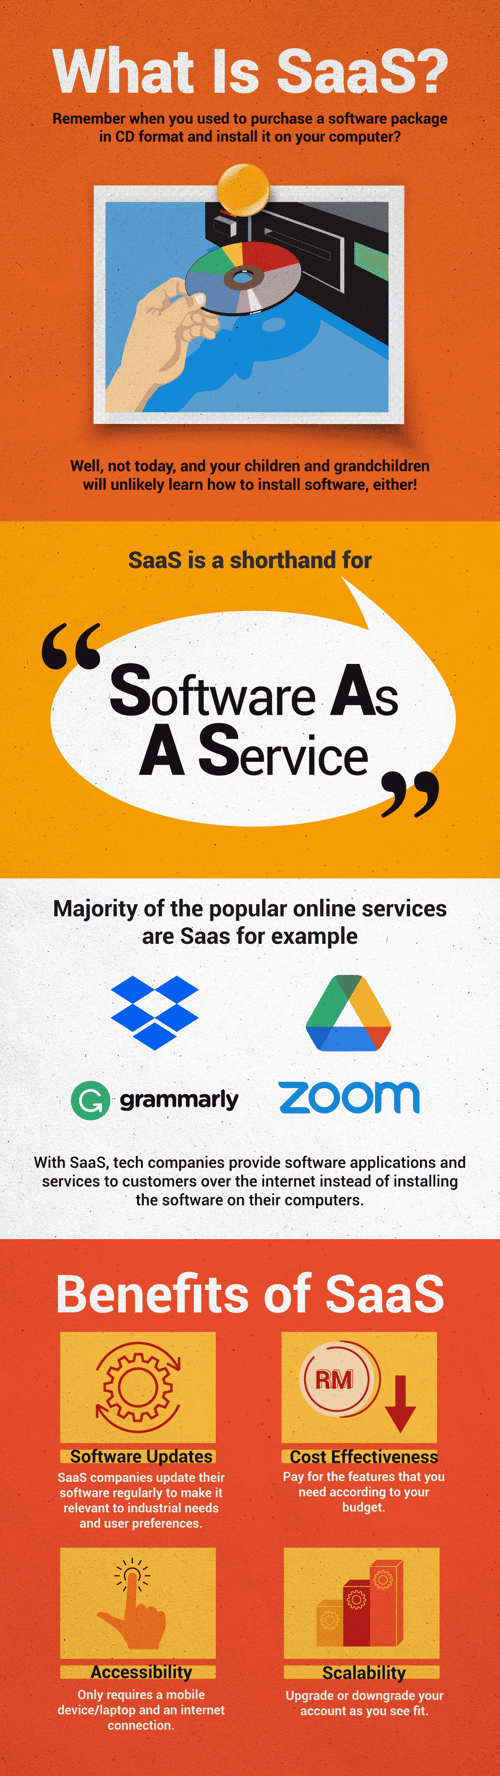 An infographic that covers SaaS basics for small businesses